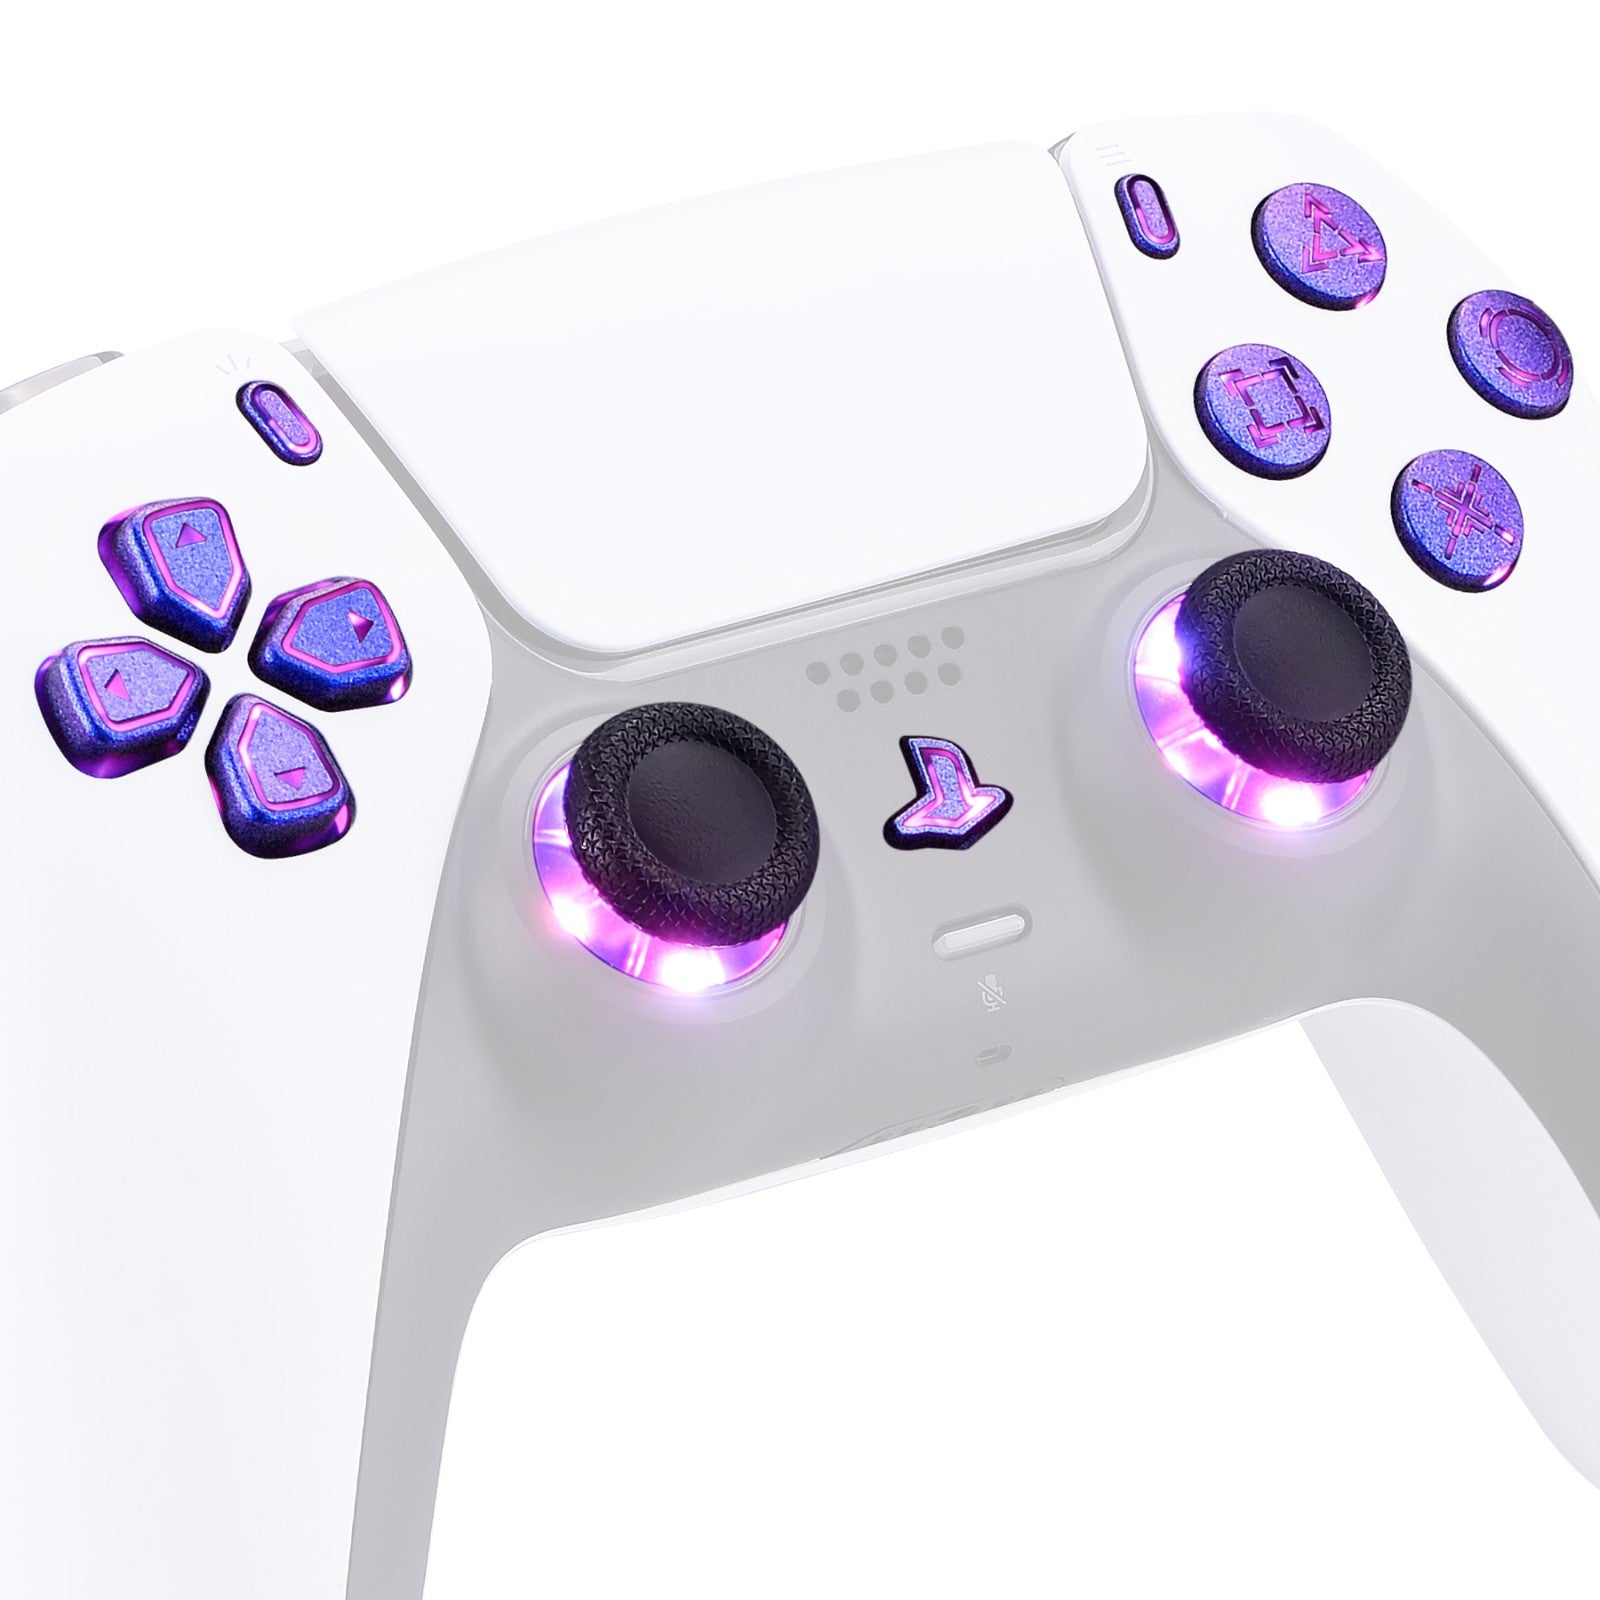 eXtremeRate Retail Multi-Colors Luminated Dpad Thumbstick Share Home Face Buttons for PS5 Controller, Chameleon Purple Blue Classical Symbols Buttons DTF V3 LED Kit for PS5 Controller - Controller NOT Included - PFLED04G2